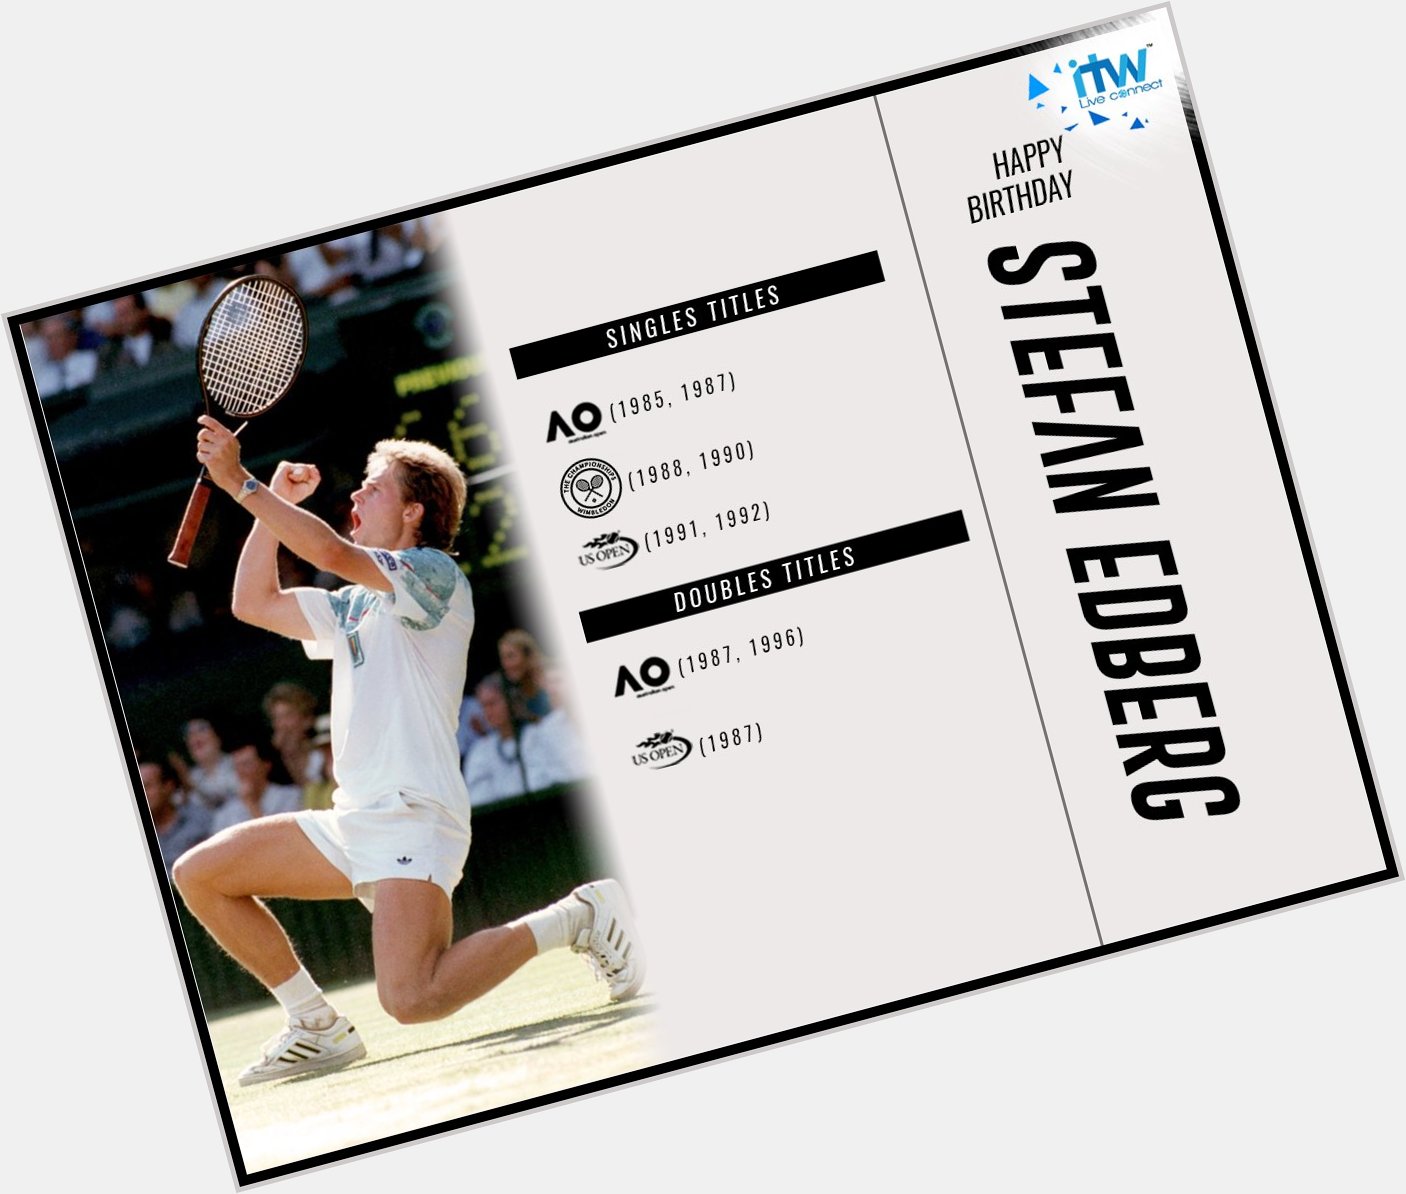 He is one of the greatest players of his era, Happy Birthday Stefan Edberg 